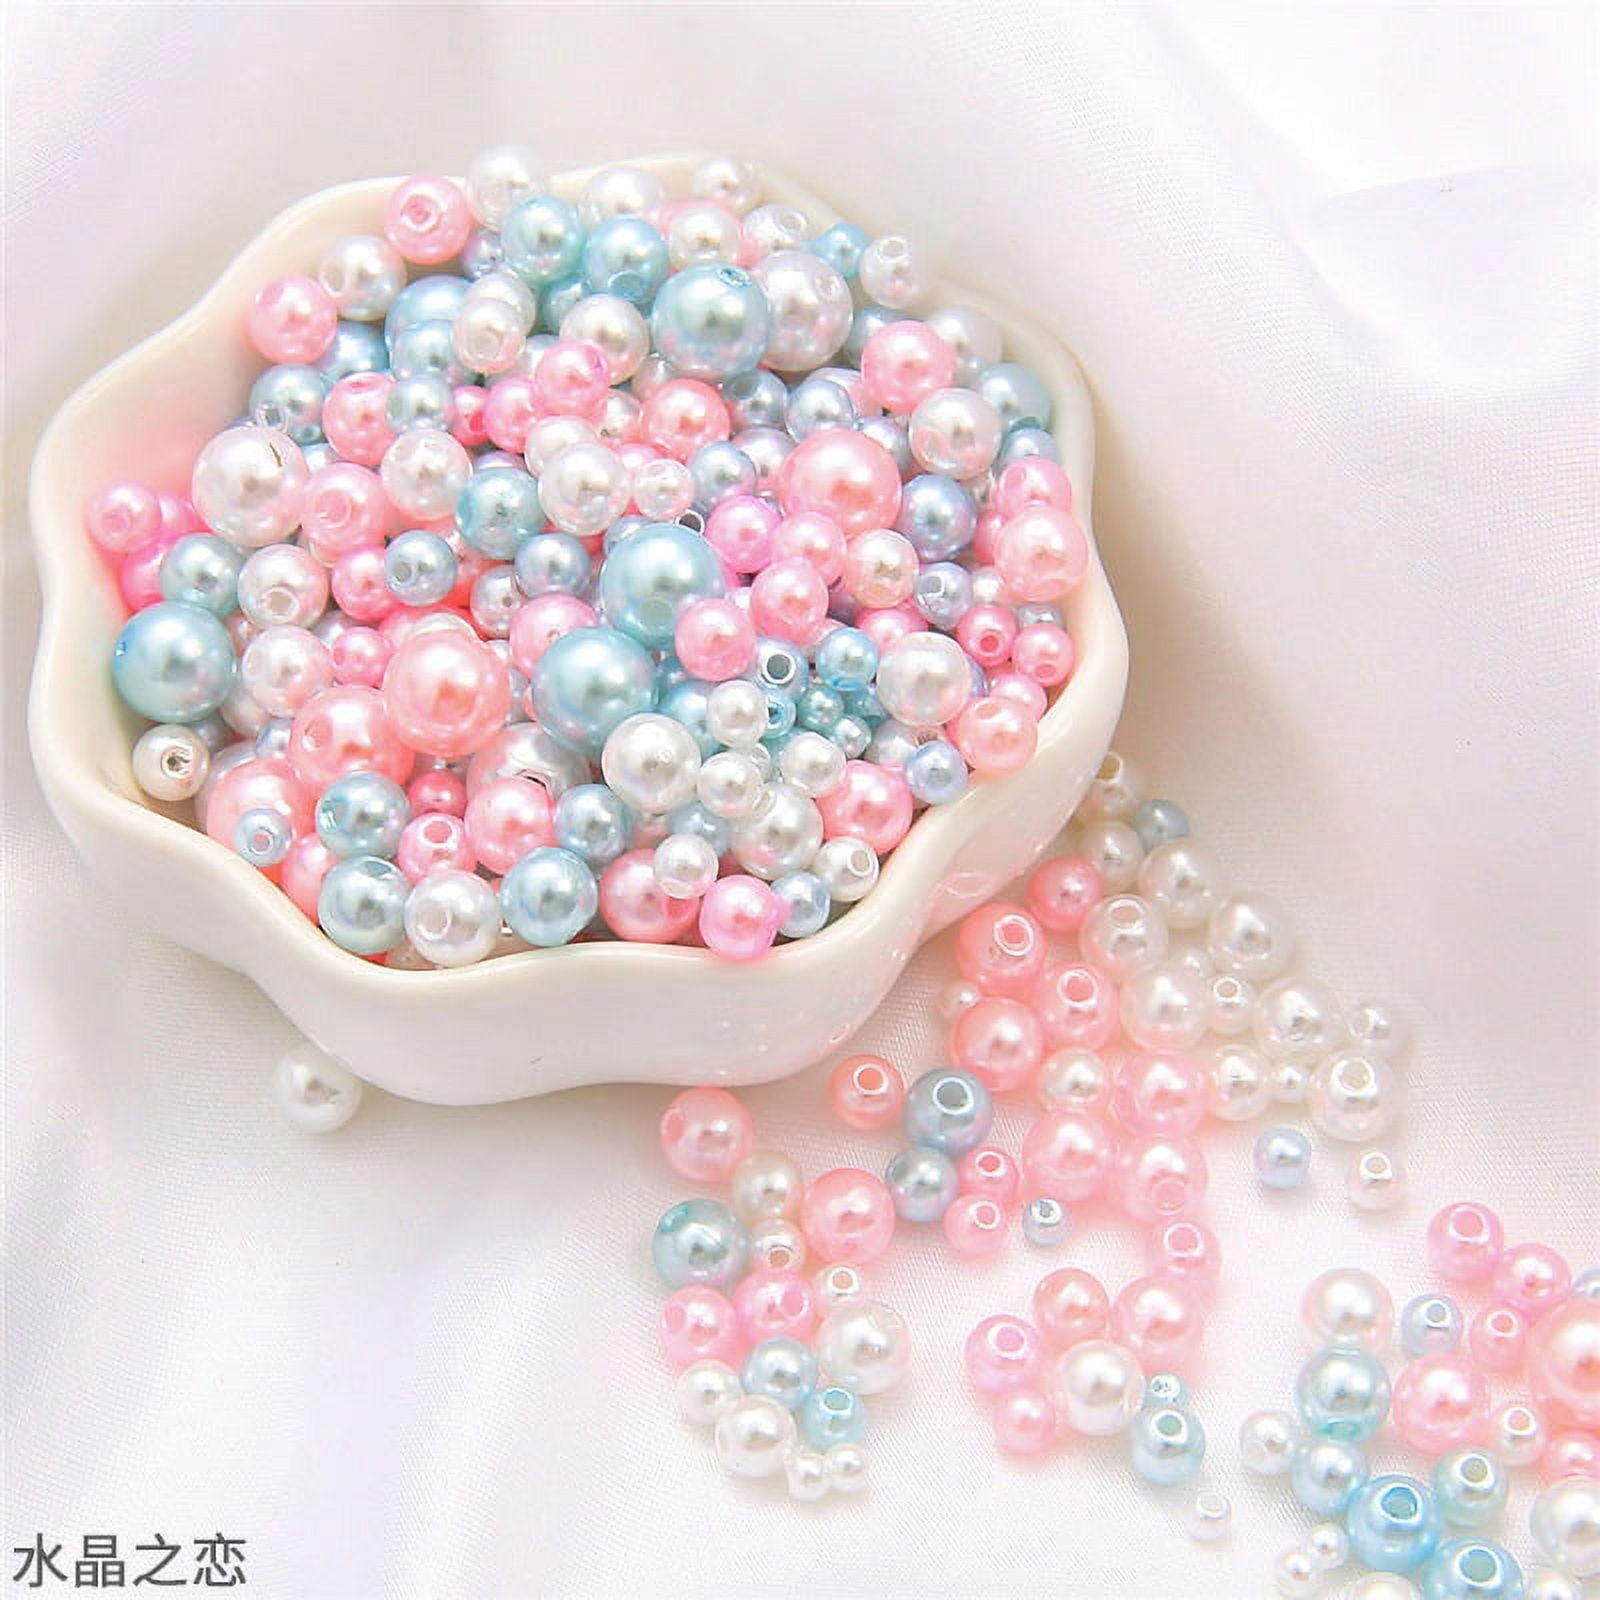 Niziky 500PCS Pearls Beads for Jewelry Making, Lt.Pink 8mm Loose Spacer  Round Pearls Beads with Hole, Faux Pearls Beads for Bracelets Necklace  Crafts